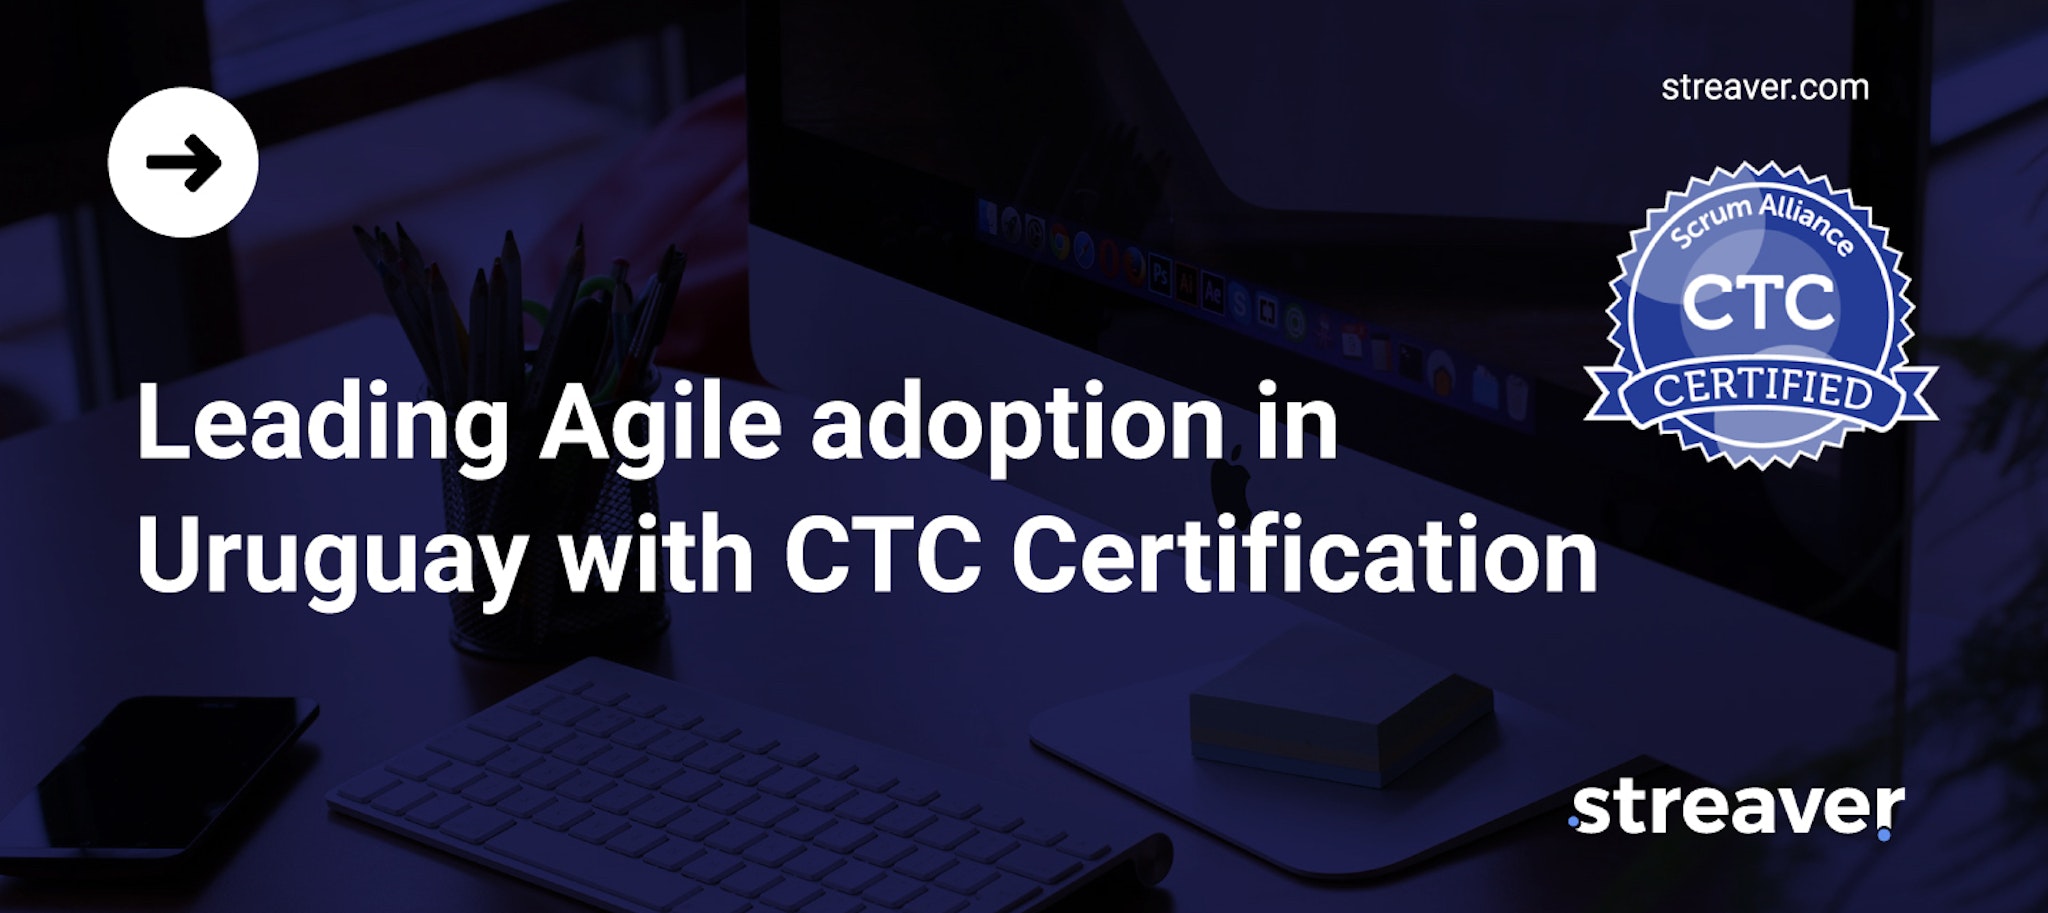 Leading Agile adoption in Uruguay with CTC Certification